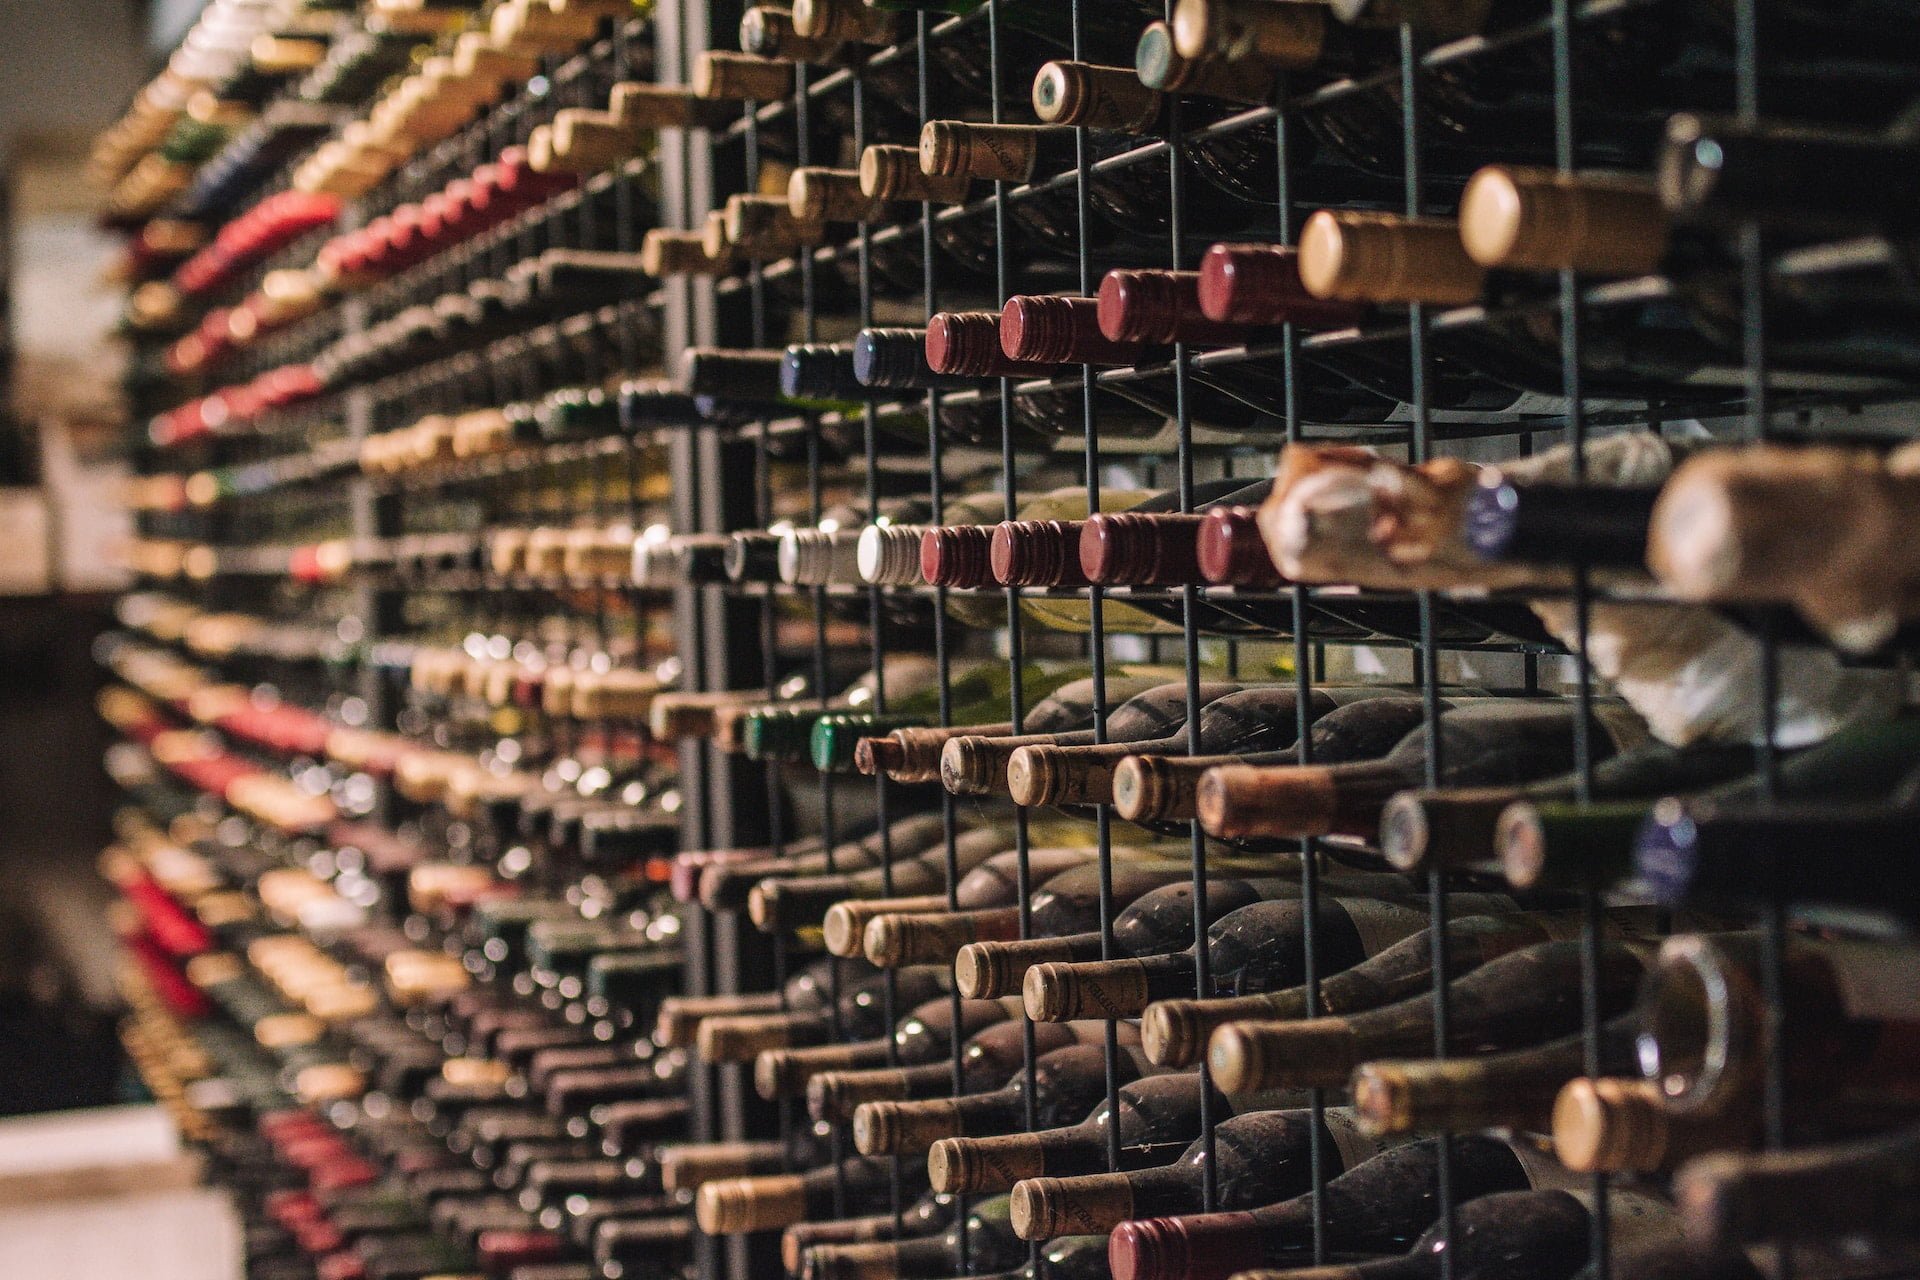 Depicts a series of wine bottles arranged in storage shelves. Used as a cover image for a landing page introducing Vint, a fractional investment platform for Wine and Whisky.